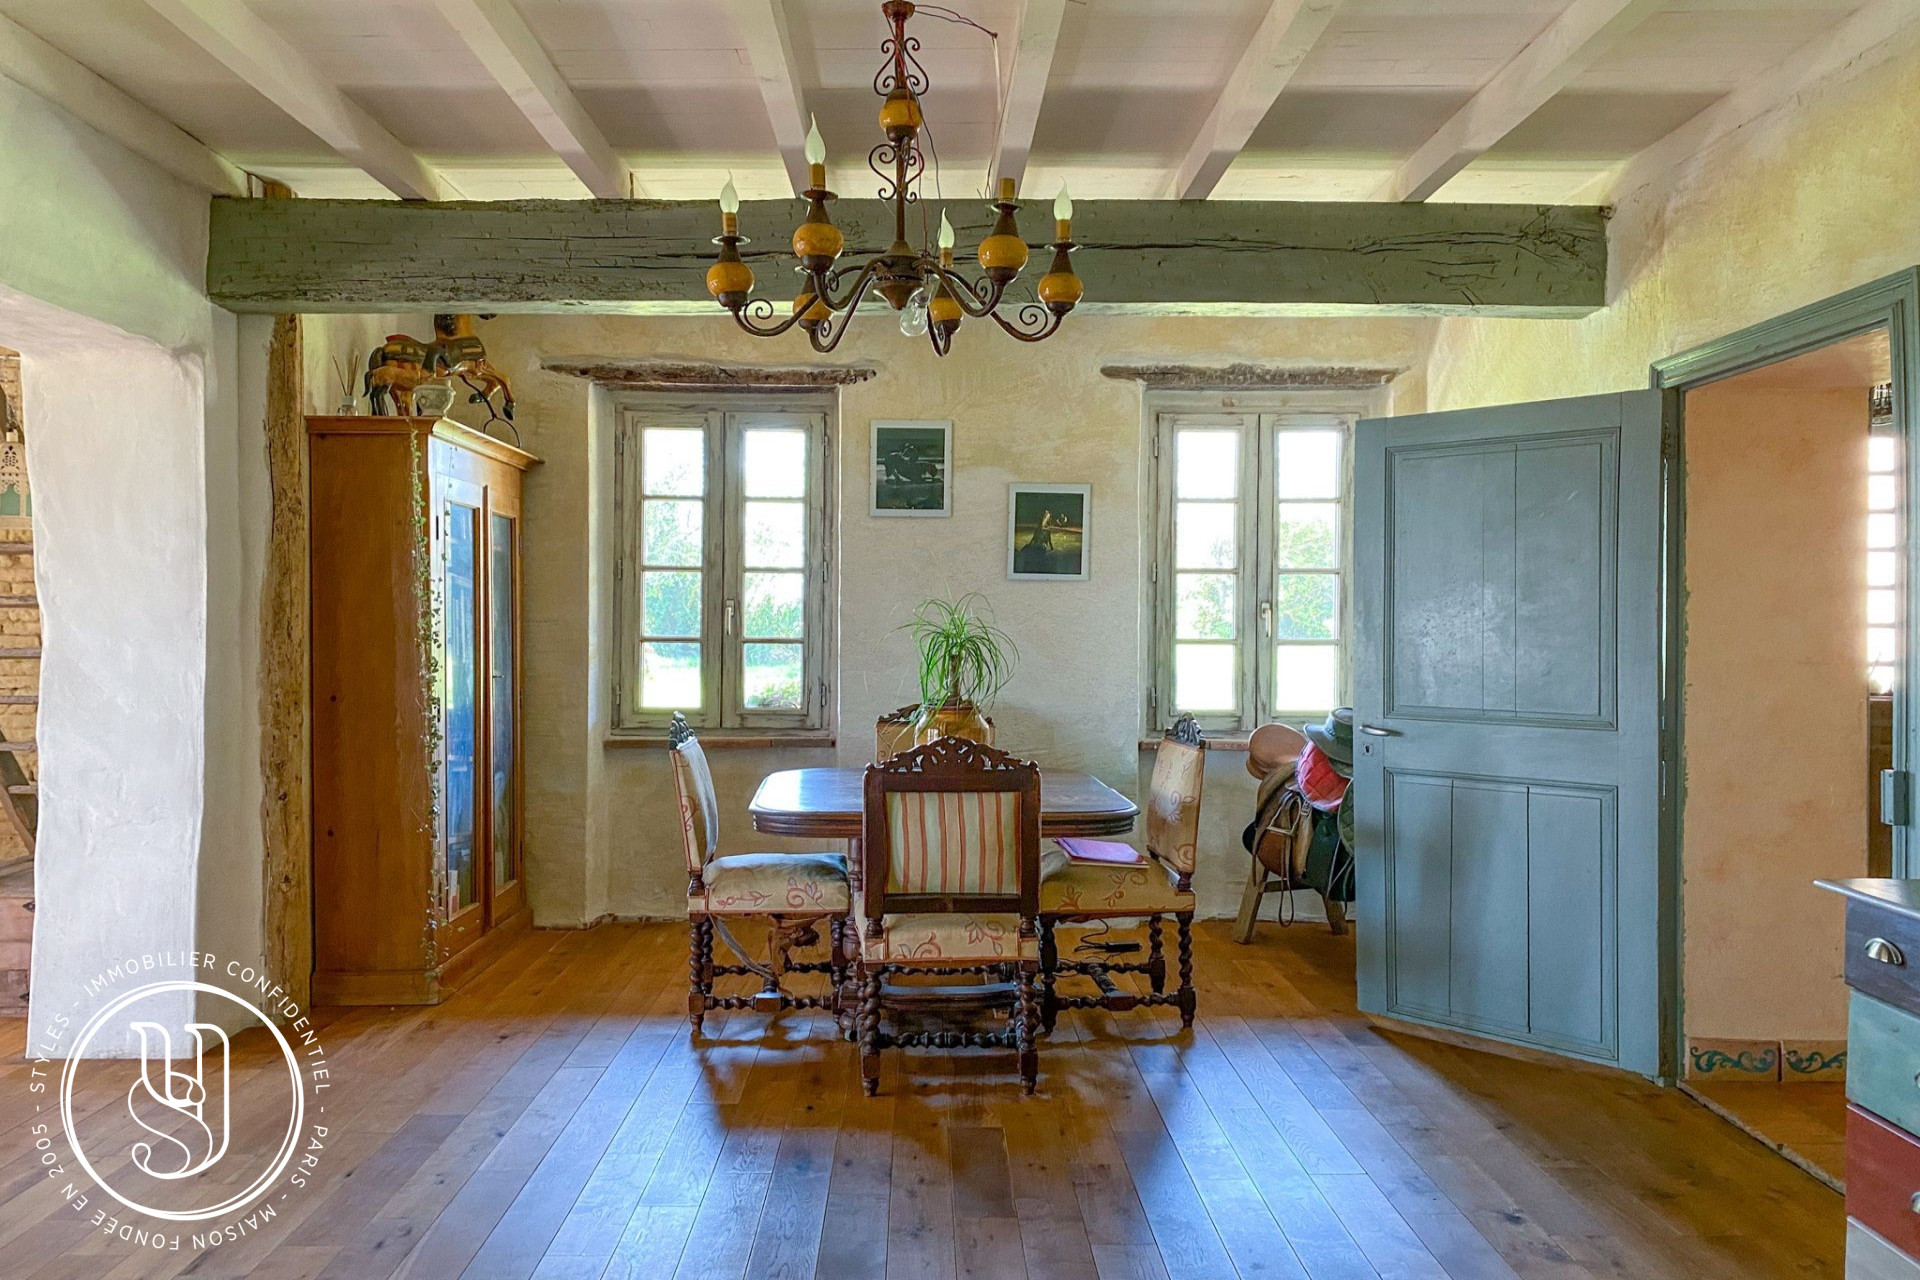 Toulouse - under offer, A superb farmhouse in the heart of 12 hectares of - image 9